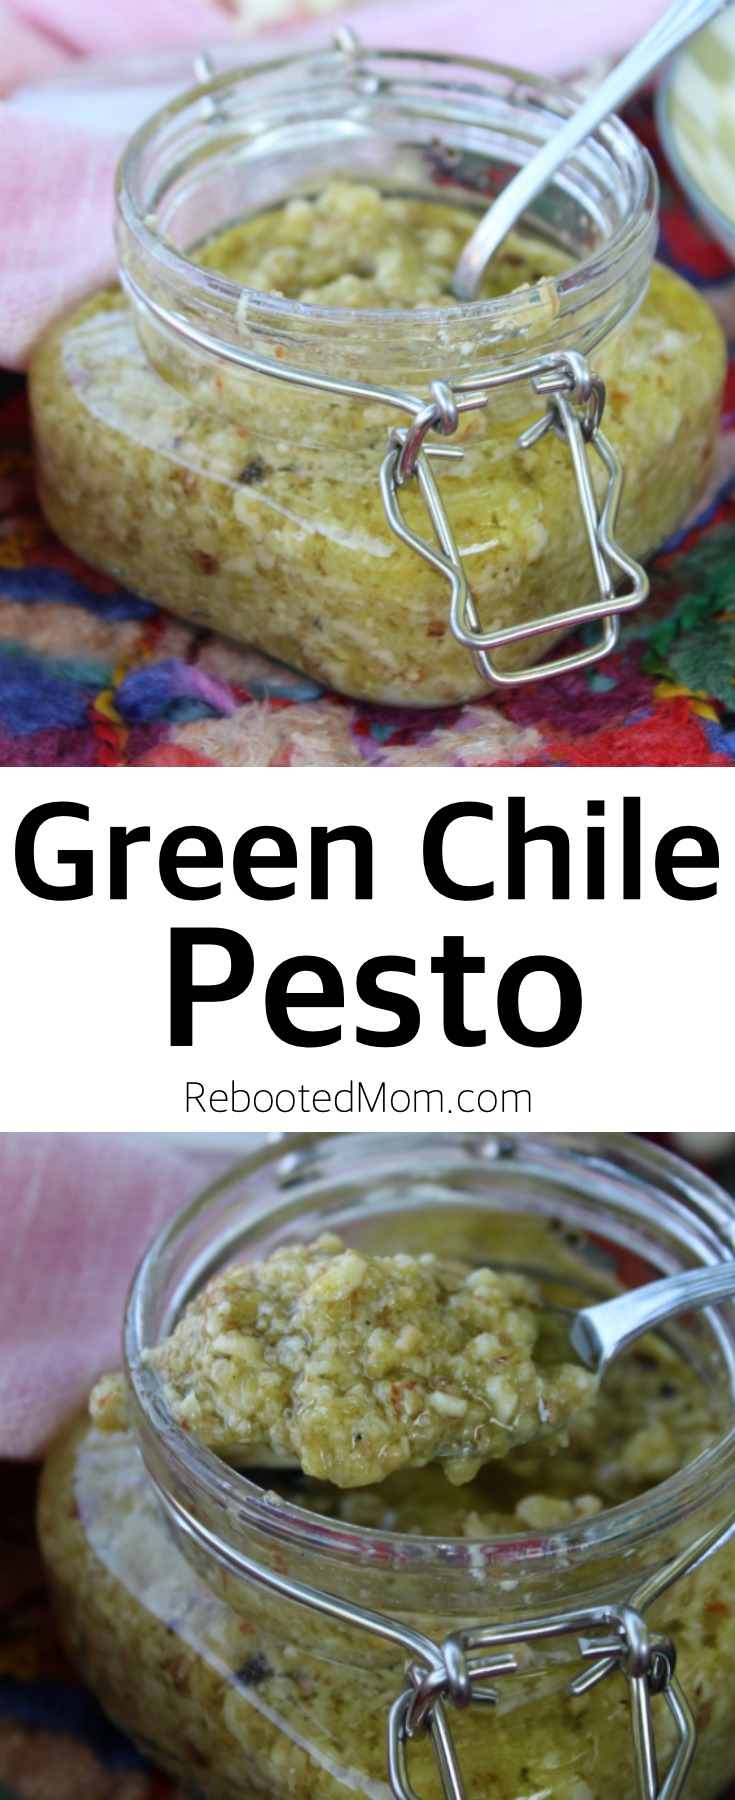 Green Chile Pesto combines the kicked up flavor of green chiles with the deliciousness of rich, creamy pesto for a delicious side that's perfect on toast, meat or even pasta! #hatch #greenchile #pesto #appetizer #Chile